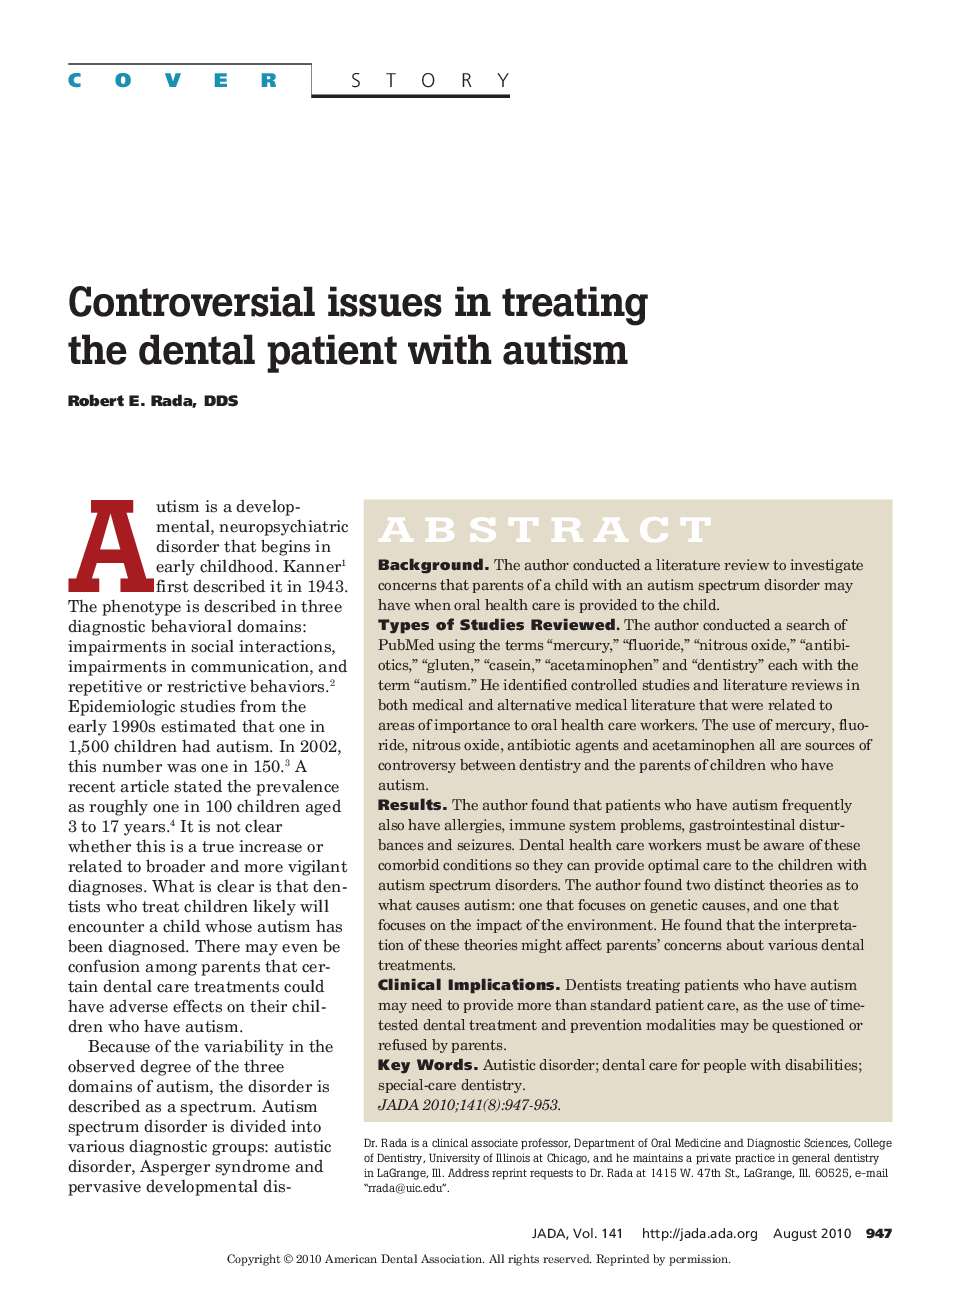 Controversial Issues in Treating the Dental Patient With Autism 